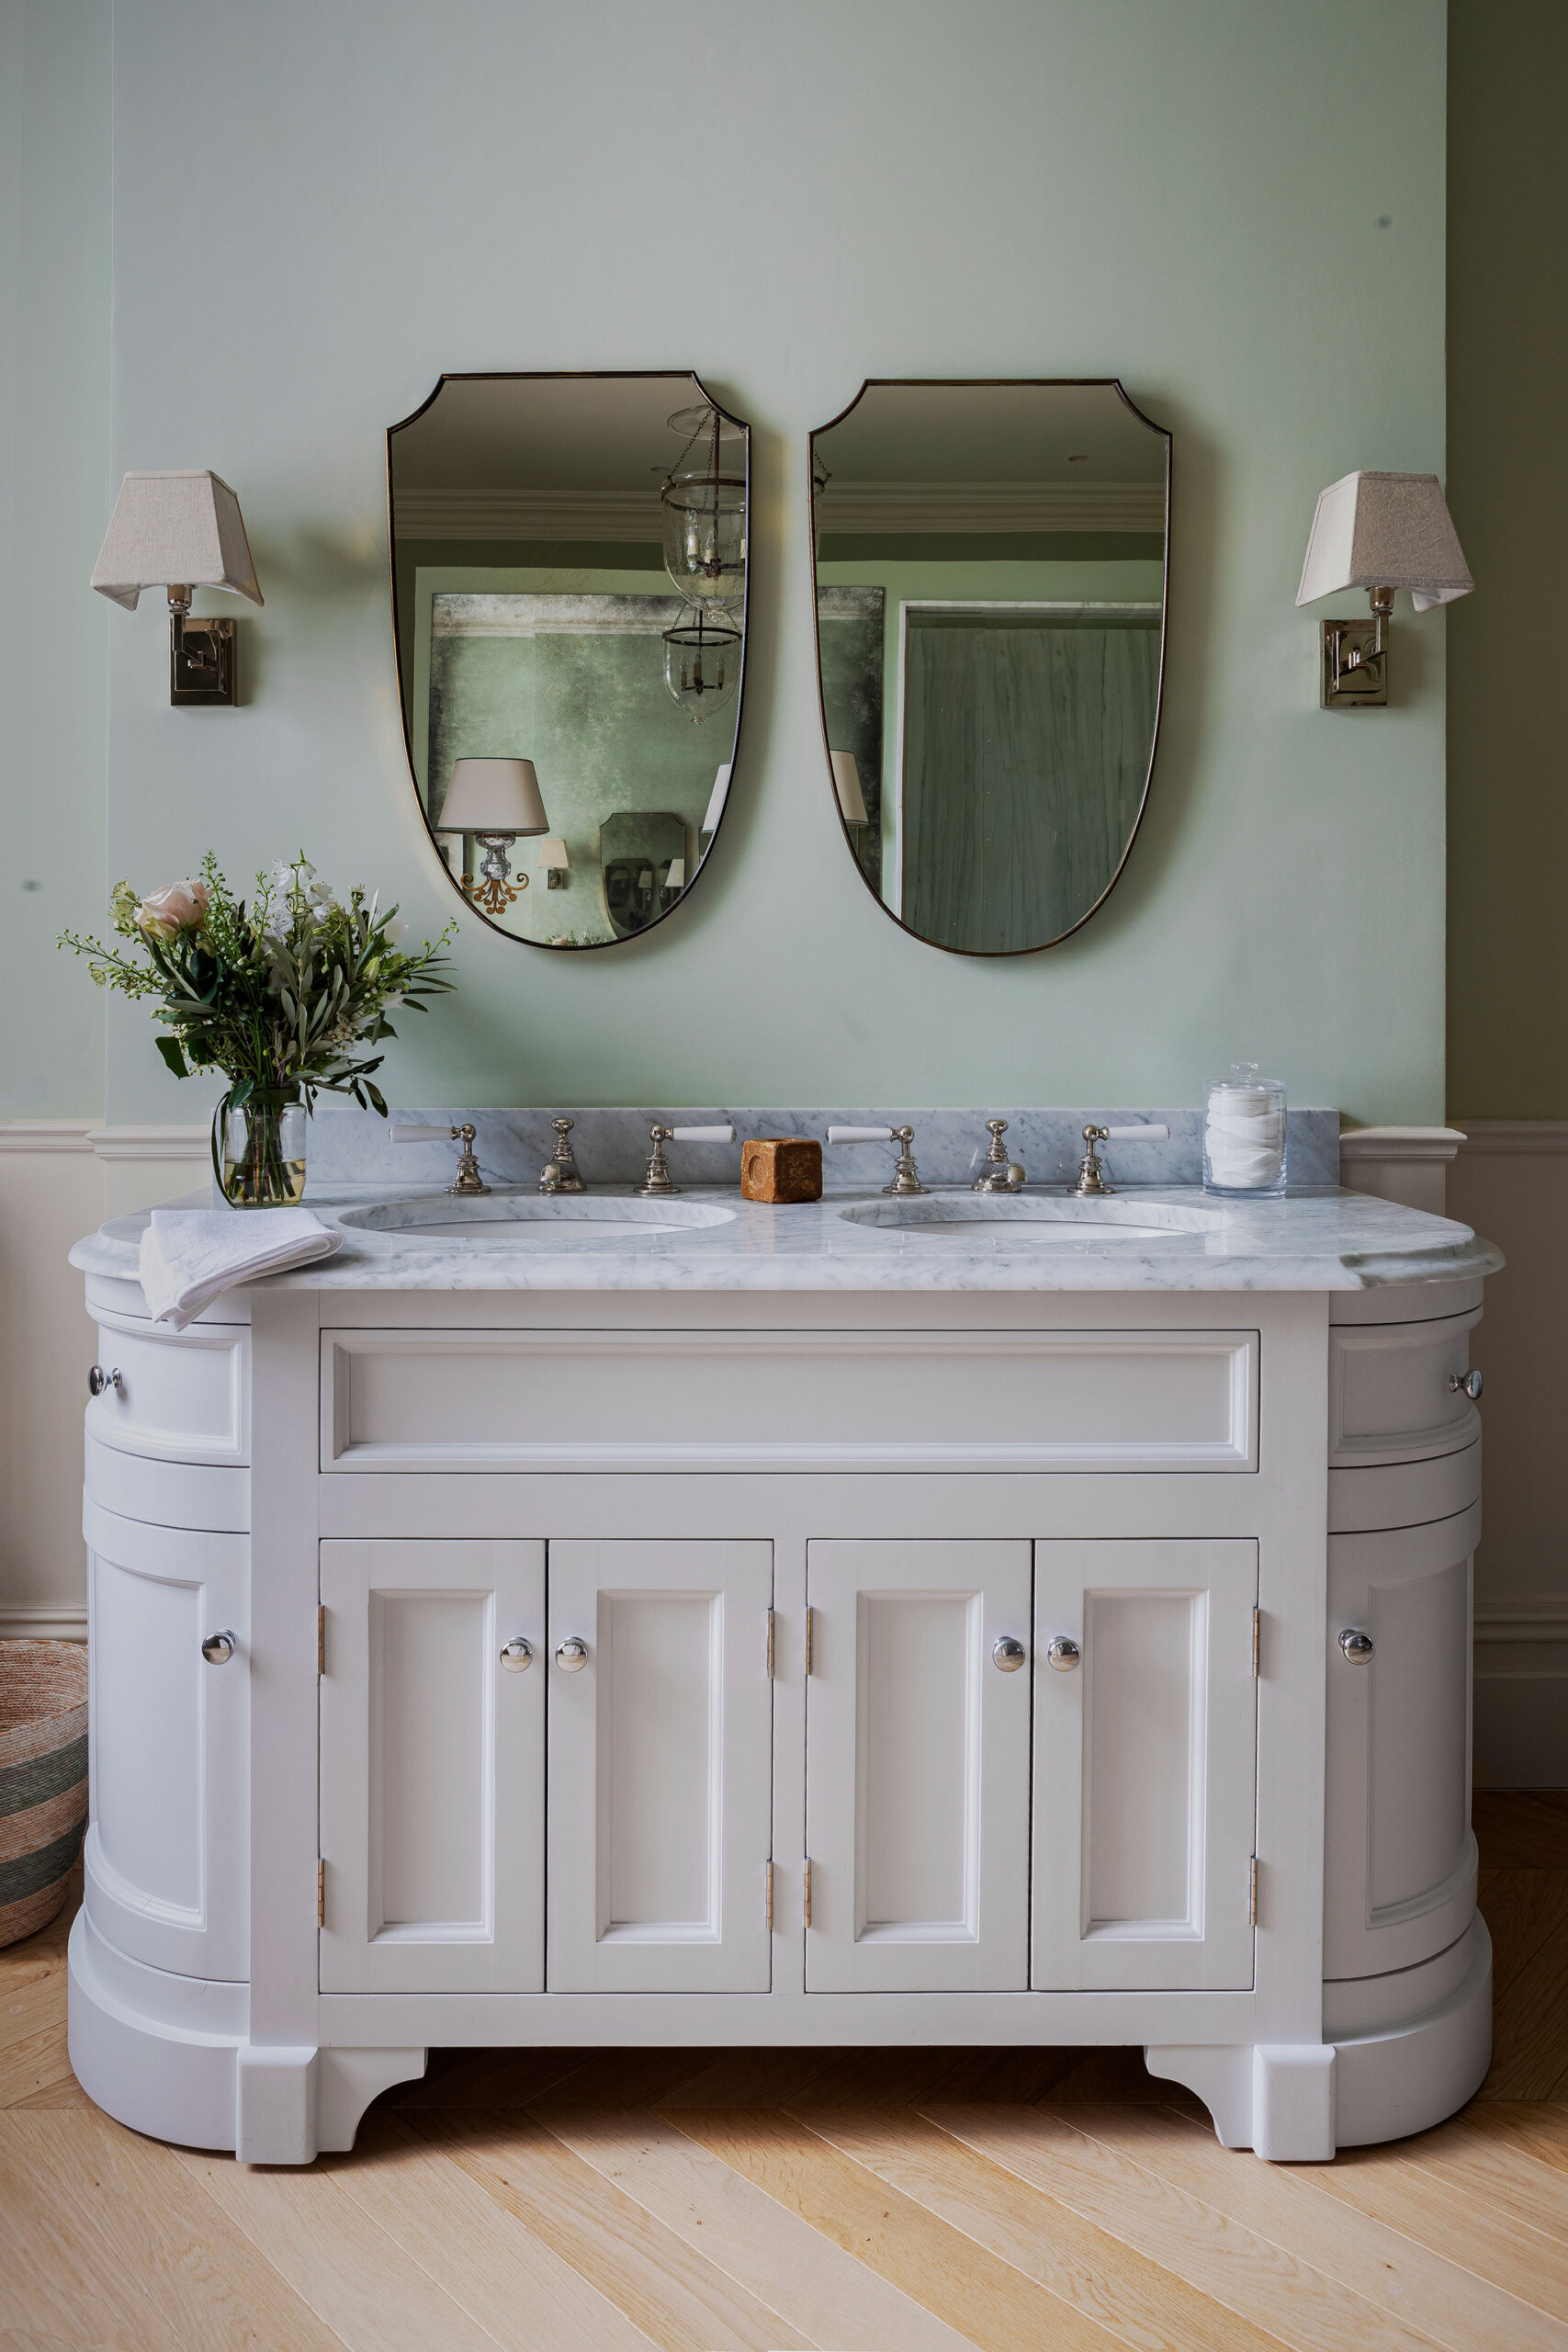 Cashmere Chevron Caroline Riddell project with white cabinet, green walls and mirror